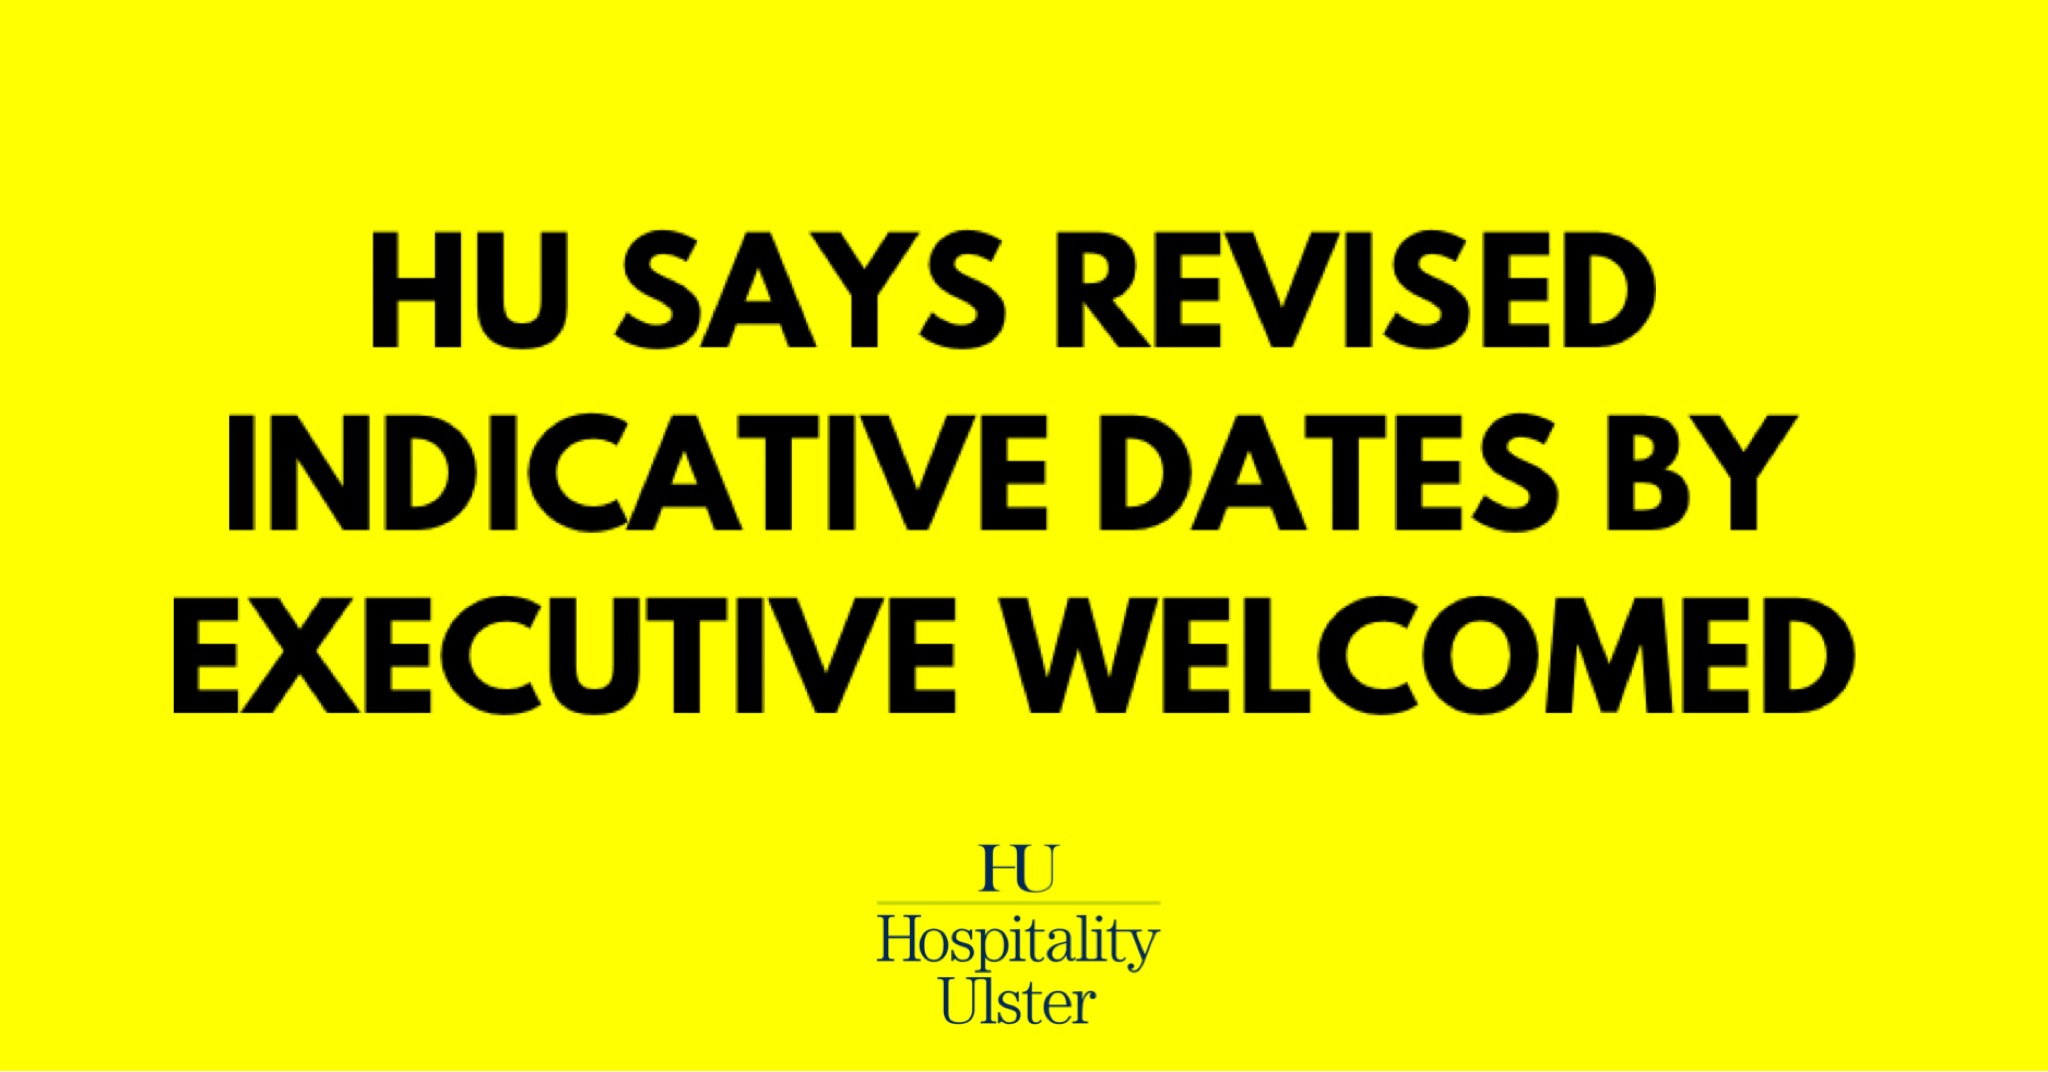 HU SAYS REVISED INDICATIVE DATES BY EXECUTIVE WELCOMED